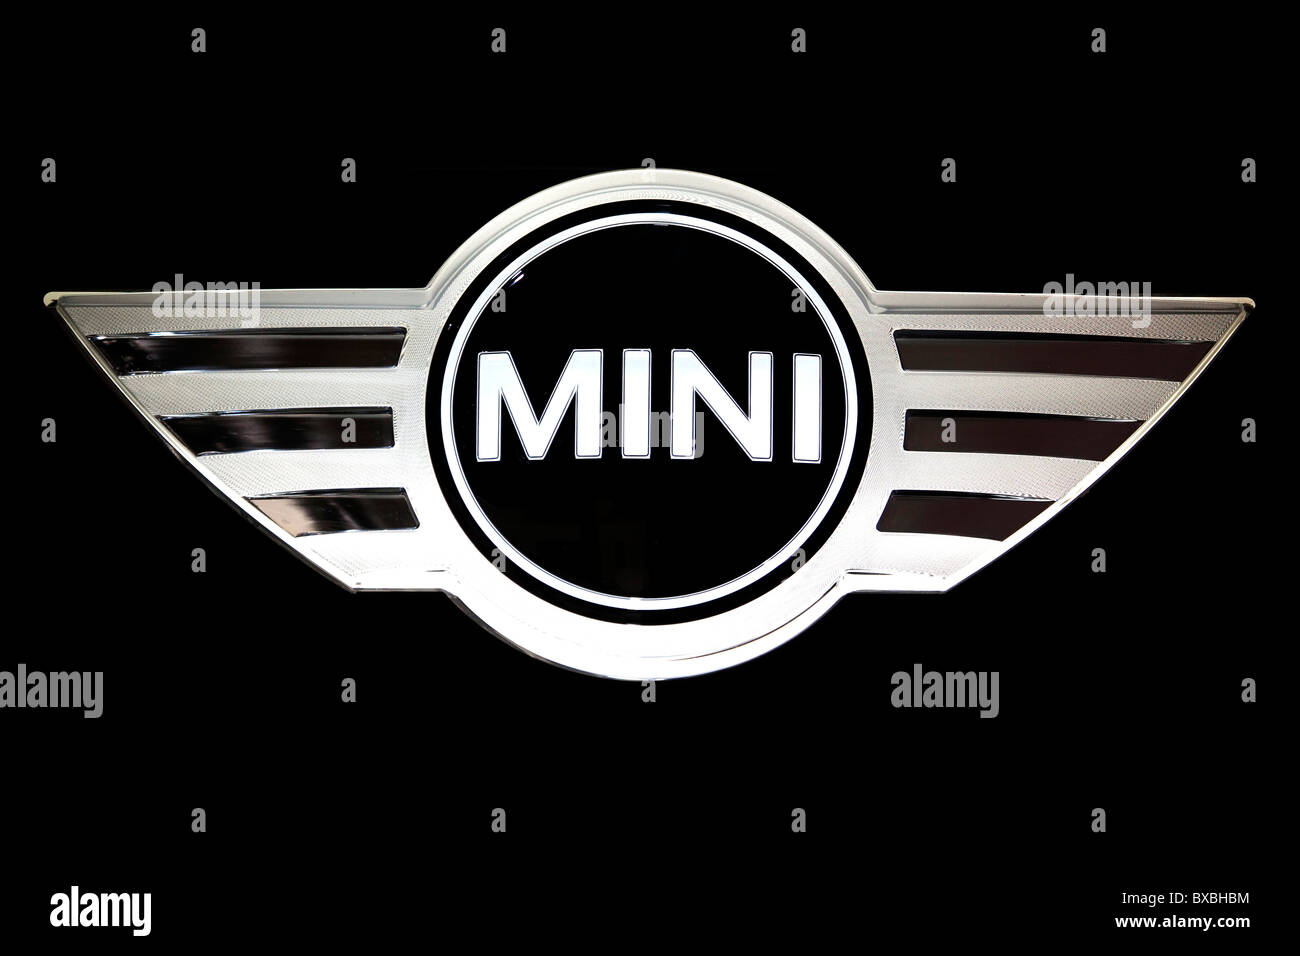 Logo of the Mini car brand, part of the BMW AG group, at the 63. Internationale Automobilausstellung International Motor Show Stock Photo